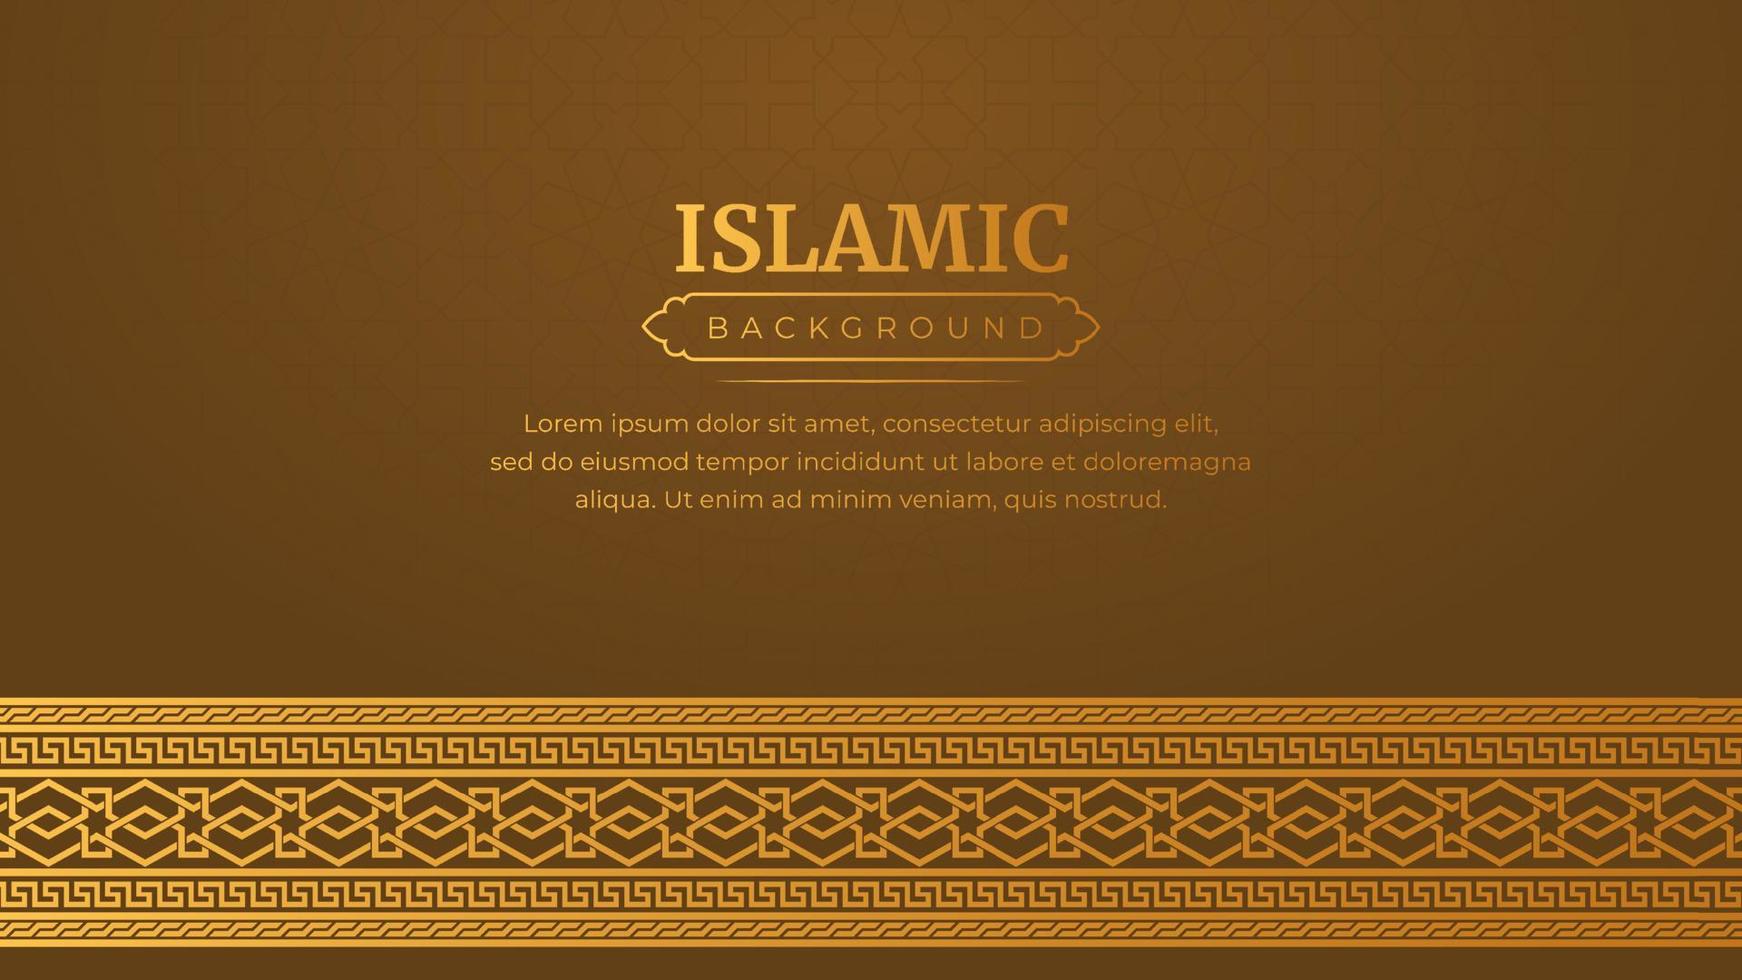 Islamic Arabic Golden Ornament Border Frame Pattern Background with Copy Space for Text vector